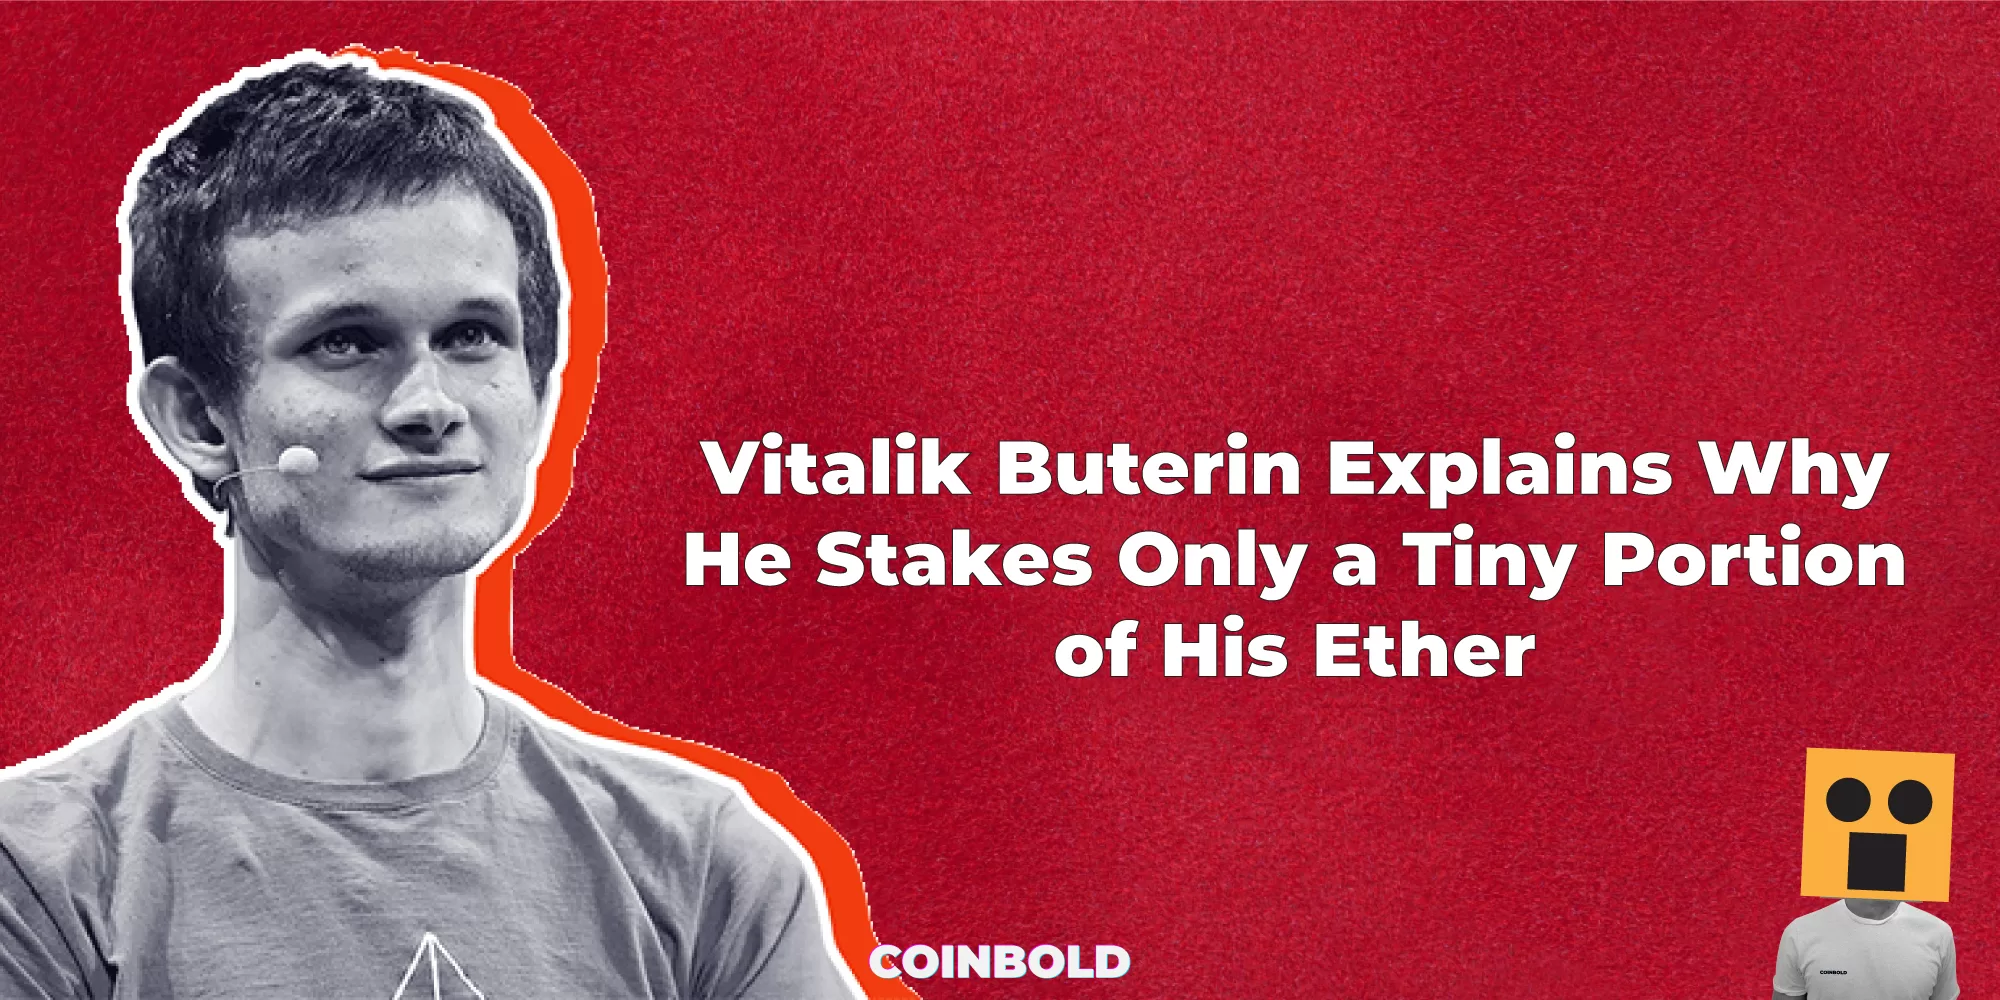 Vitalik Buterin Explains Why He Stakes Only a Tiny Portion of His Ether